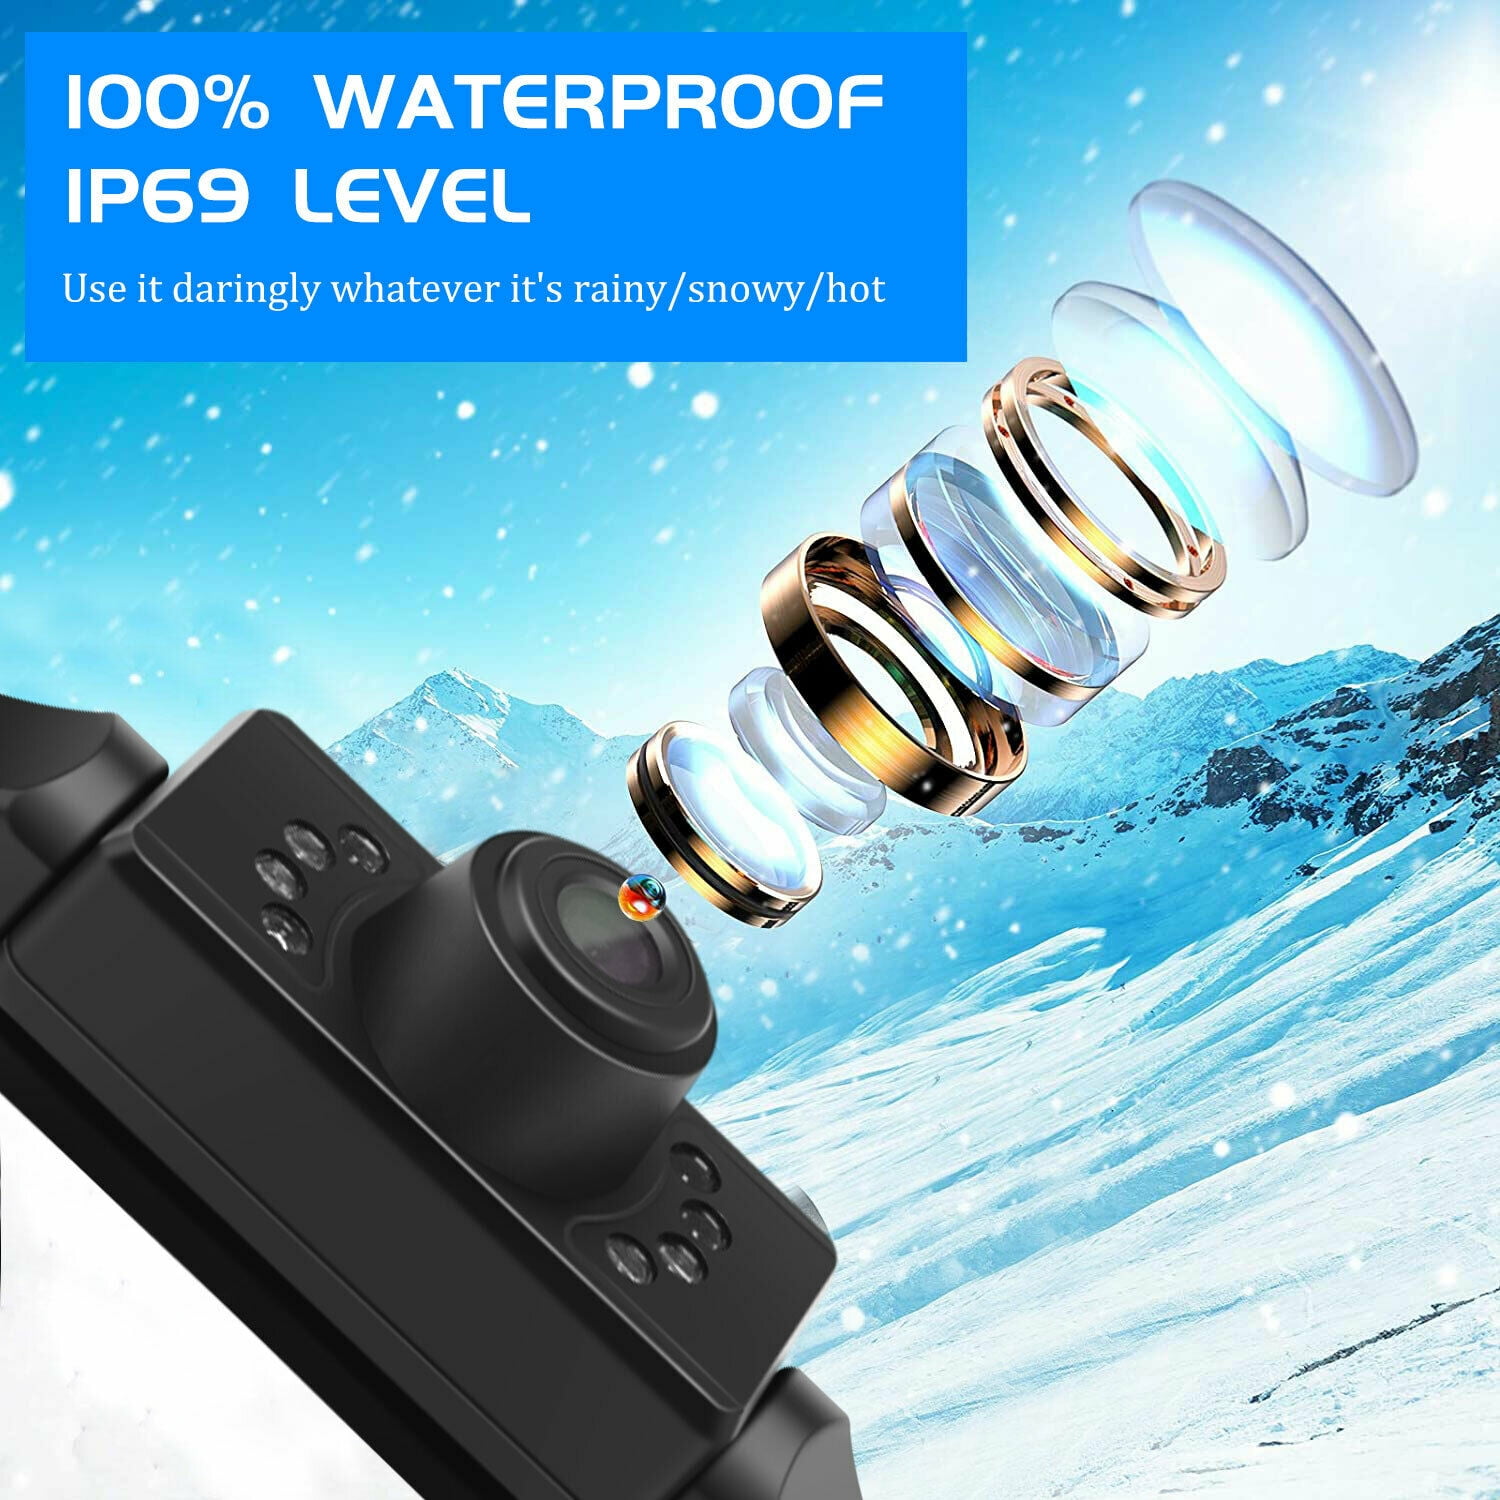 【360°Rotatable】 Backup Camera for Car Truck AHD 720P Back Up Camera for  Cars RV Front Rear View Reverse Camera Super Night Vision IP69K Waterproof